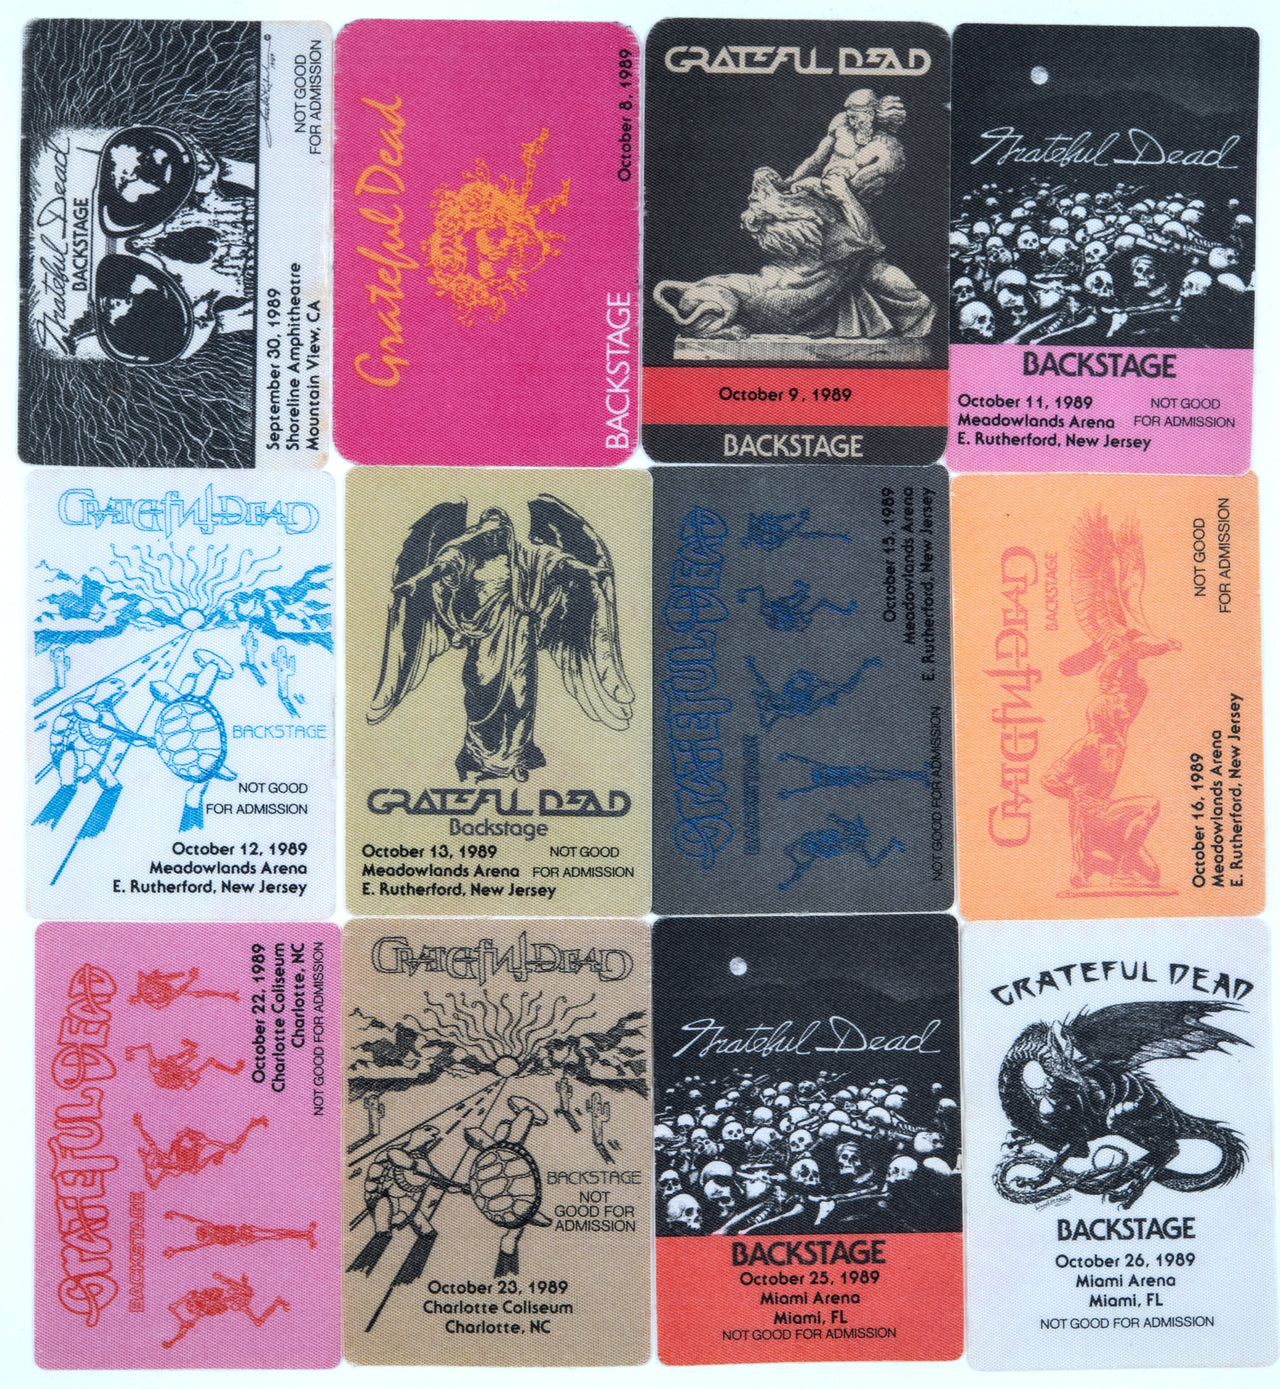 Grateful Dead Backstage Passes (9/30/1989 - 10/26/1989) from Dan Healy